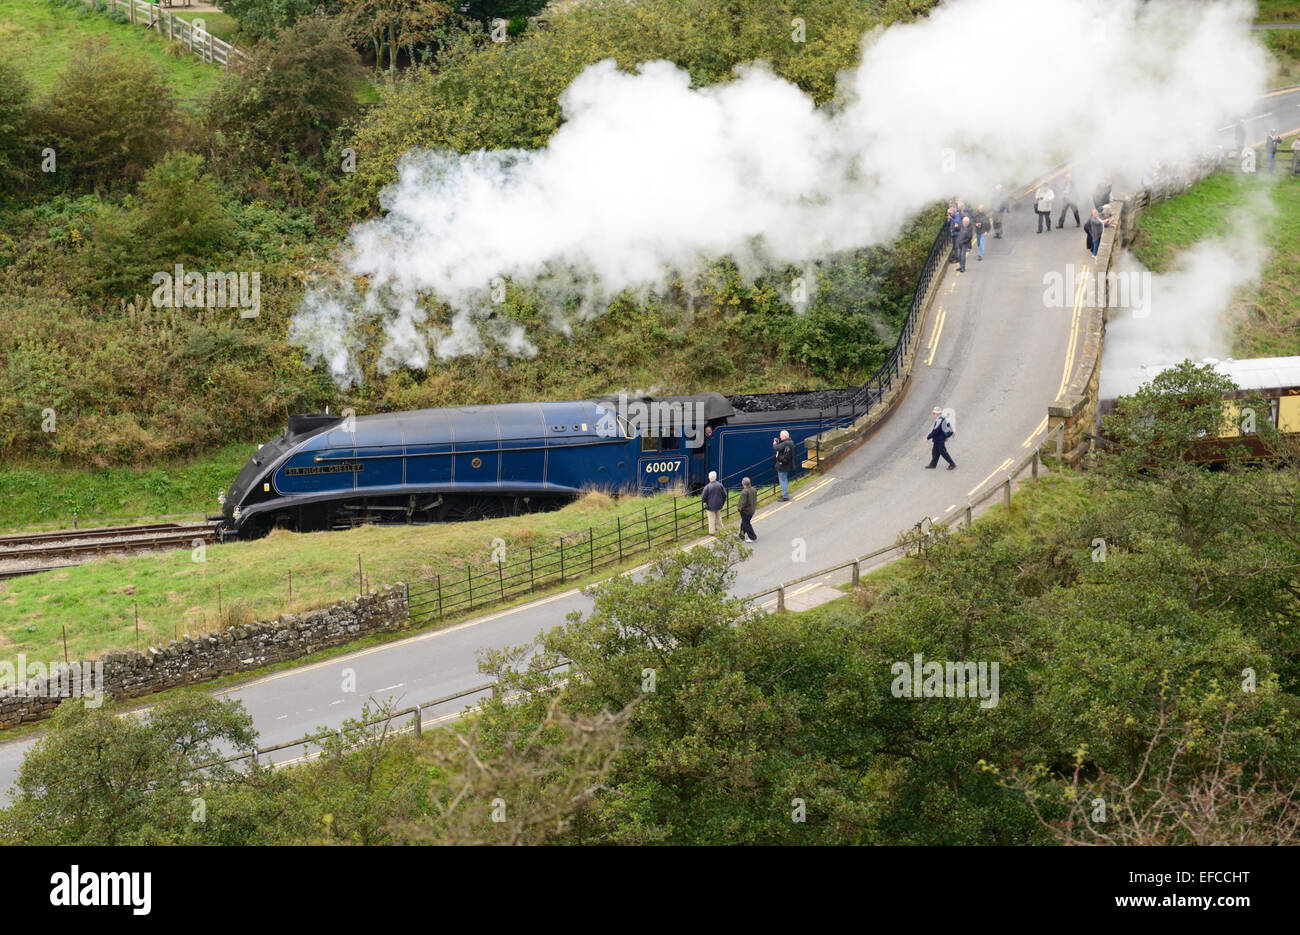 Class A4 Pacific No 60007 'Sir Nigel Gresley' passing under the road bridge as it leaves Goathland station. Stock Photo